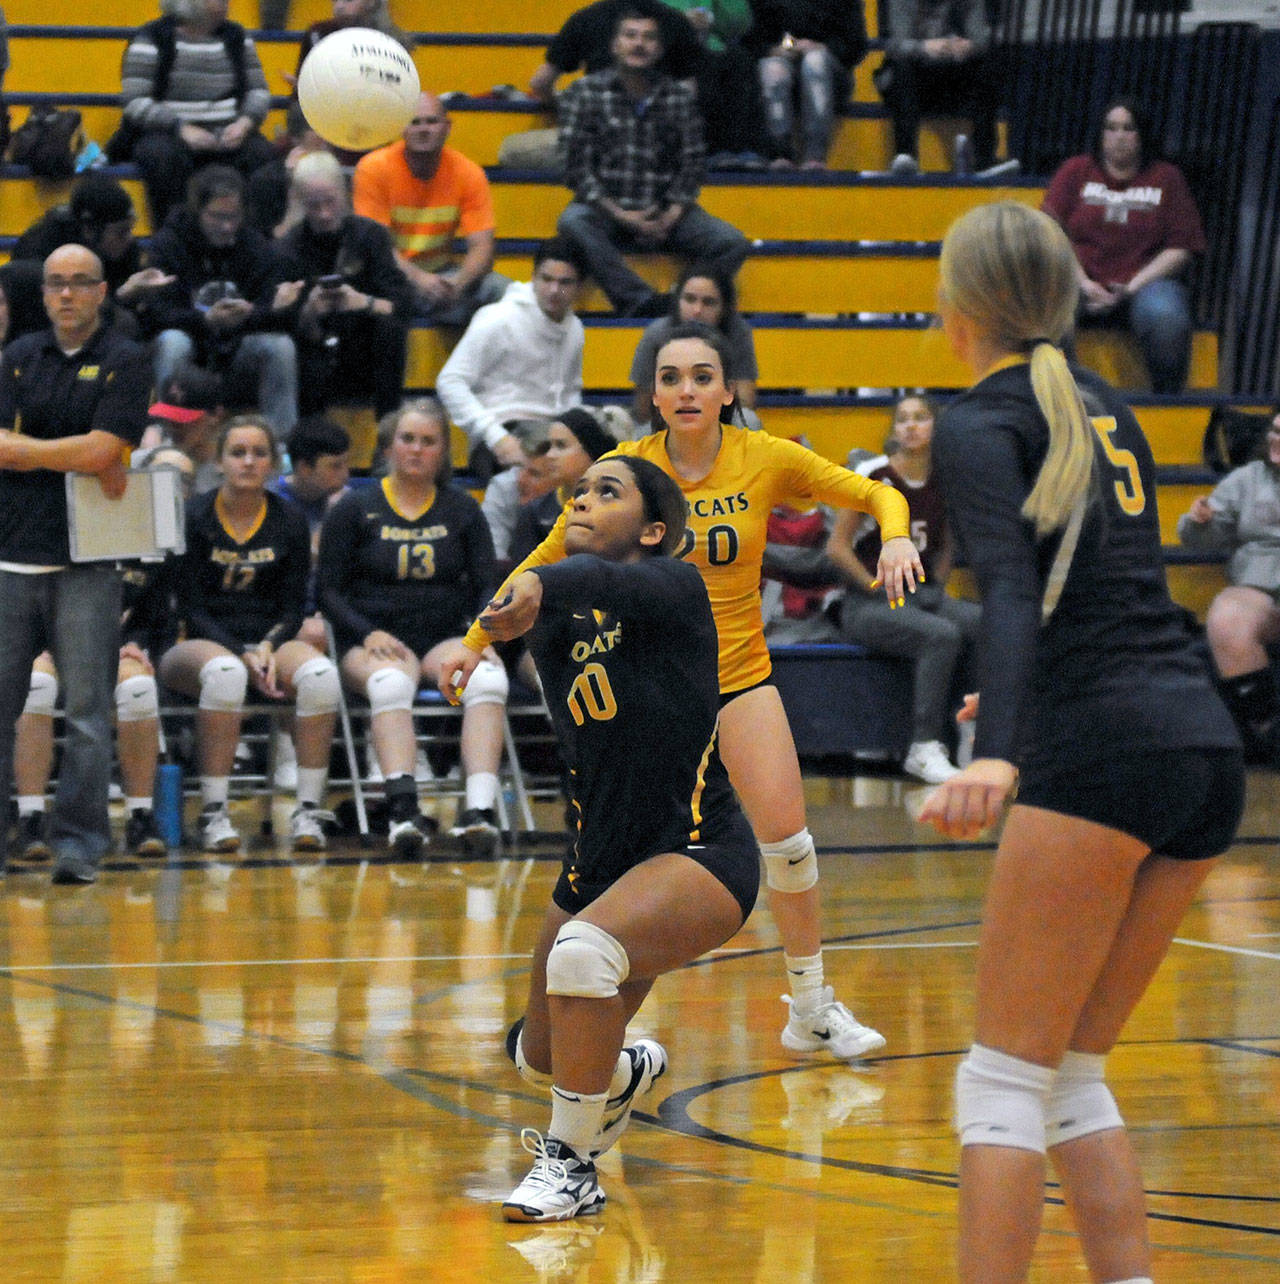 Aberdeen’s Malynda Winston receives a serve during the Bobcats’ 3-1 win over Hoquiam on Tuesday. (Ryan Sparks | The Daily World)